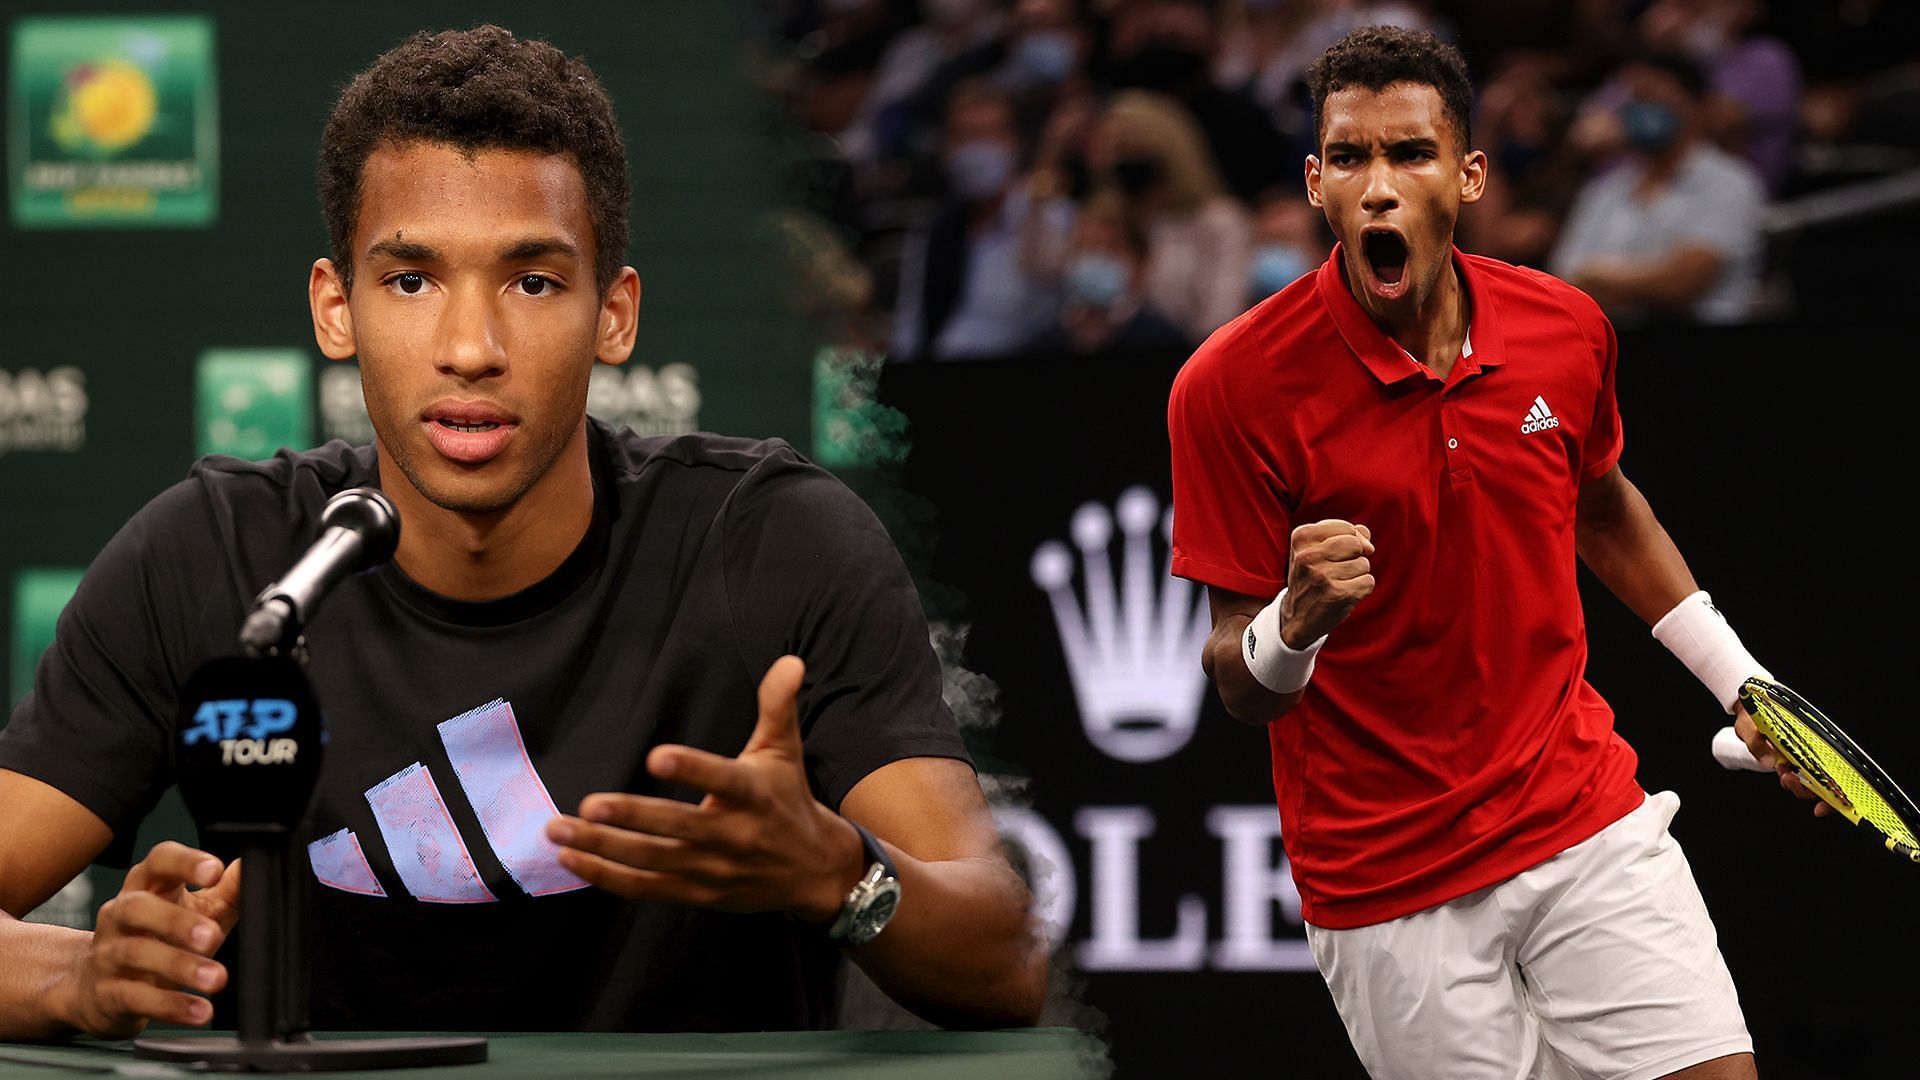 Felix Auger-Aliassime is currently ranked World No. 17.